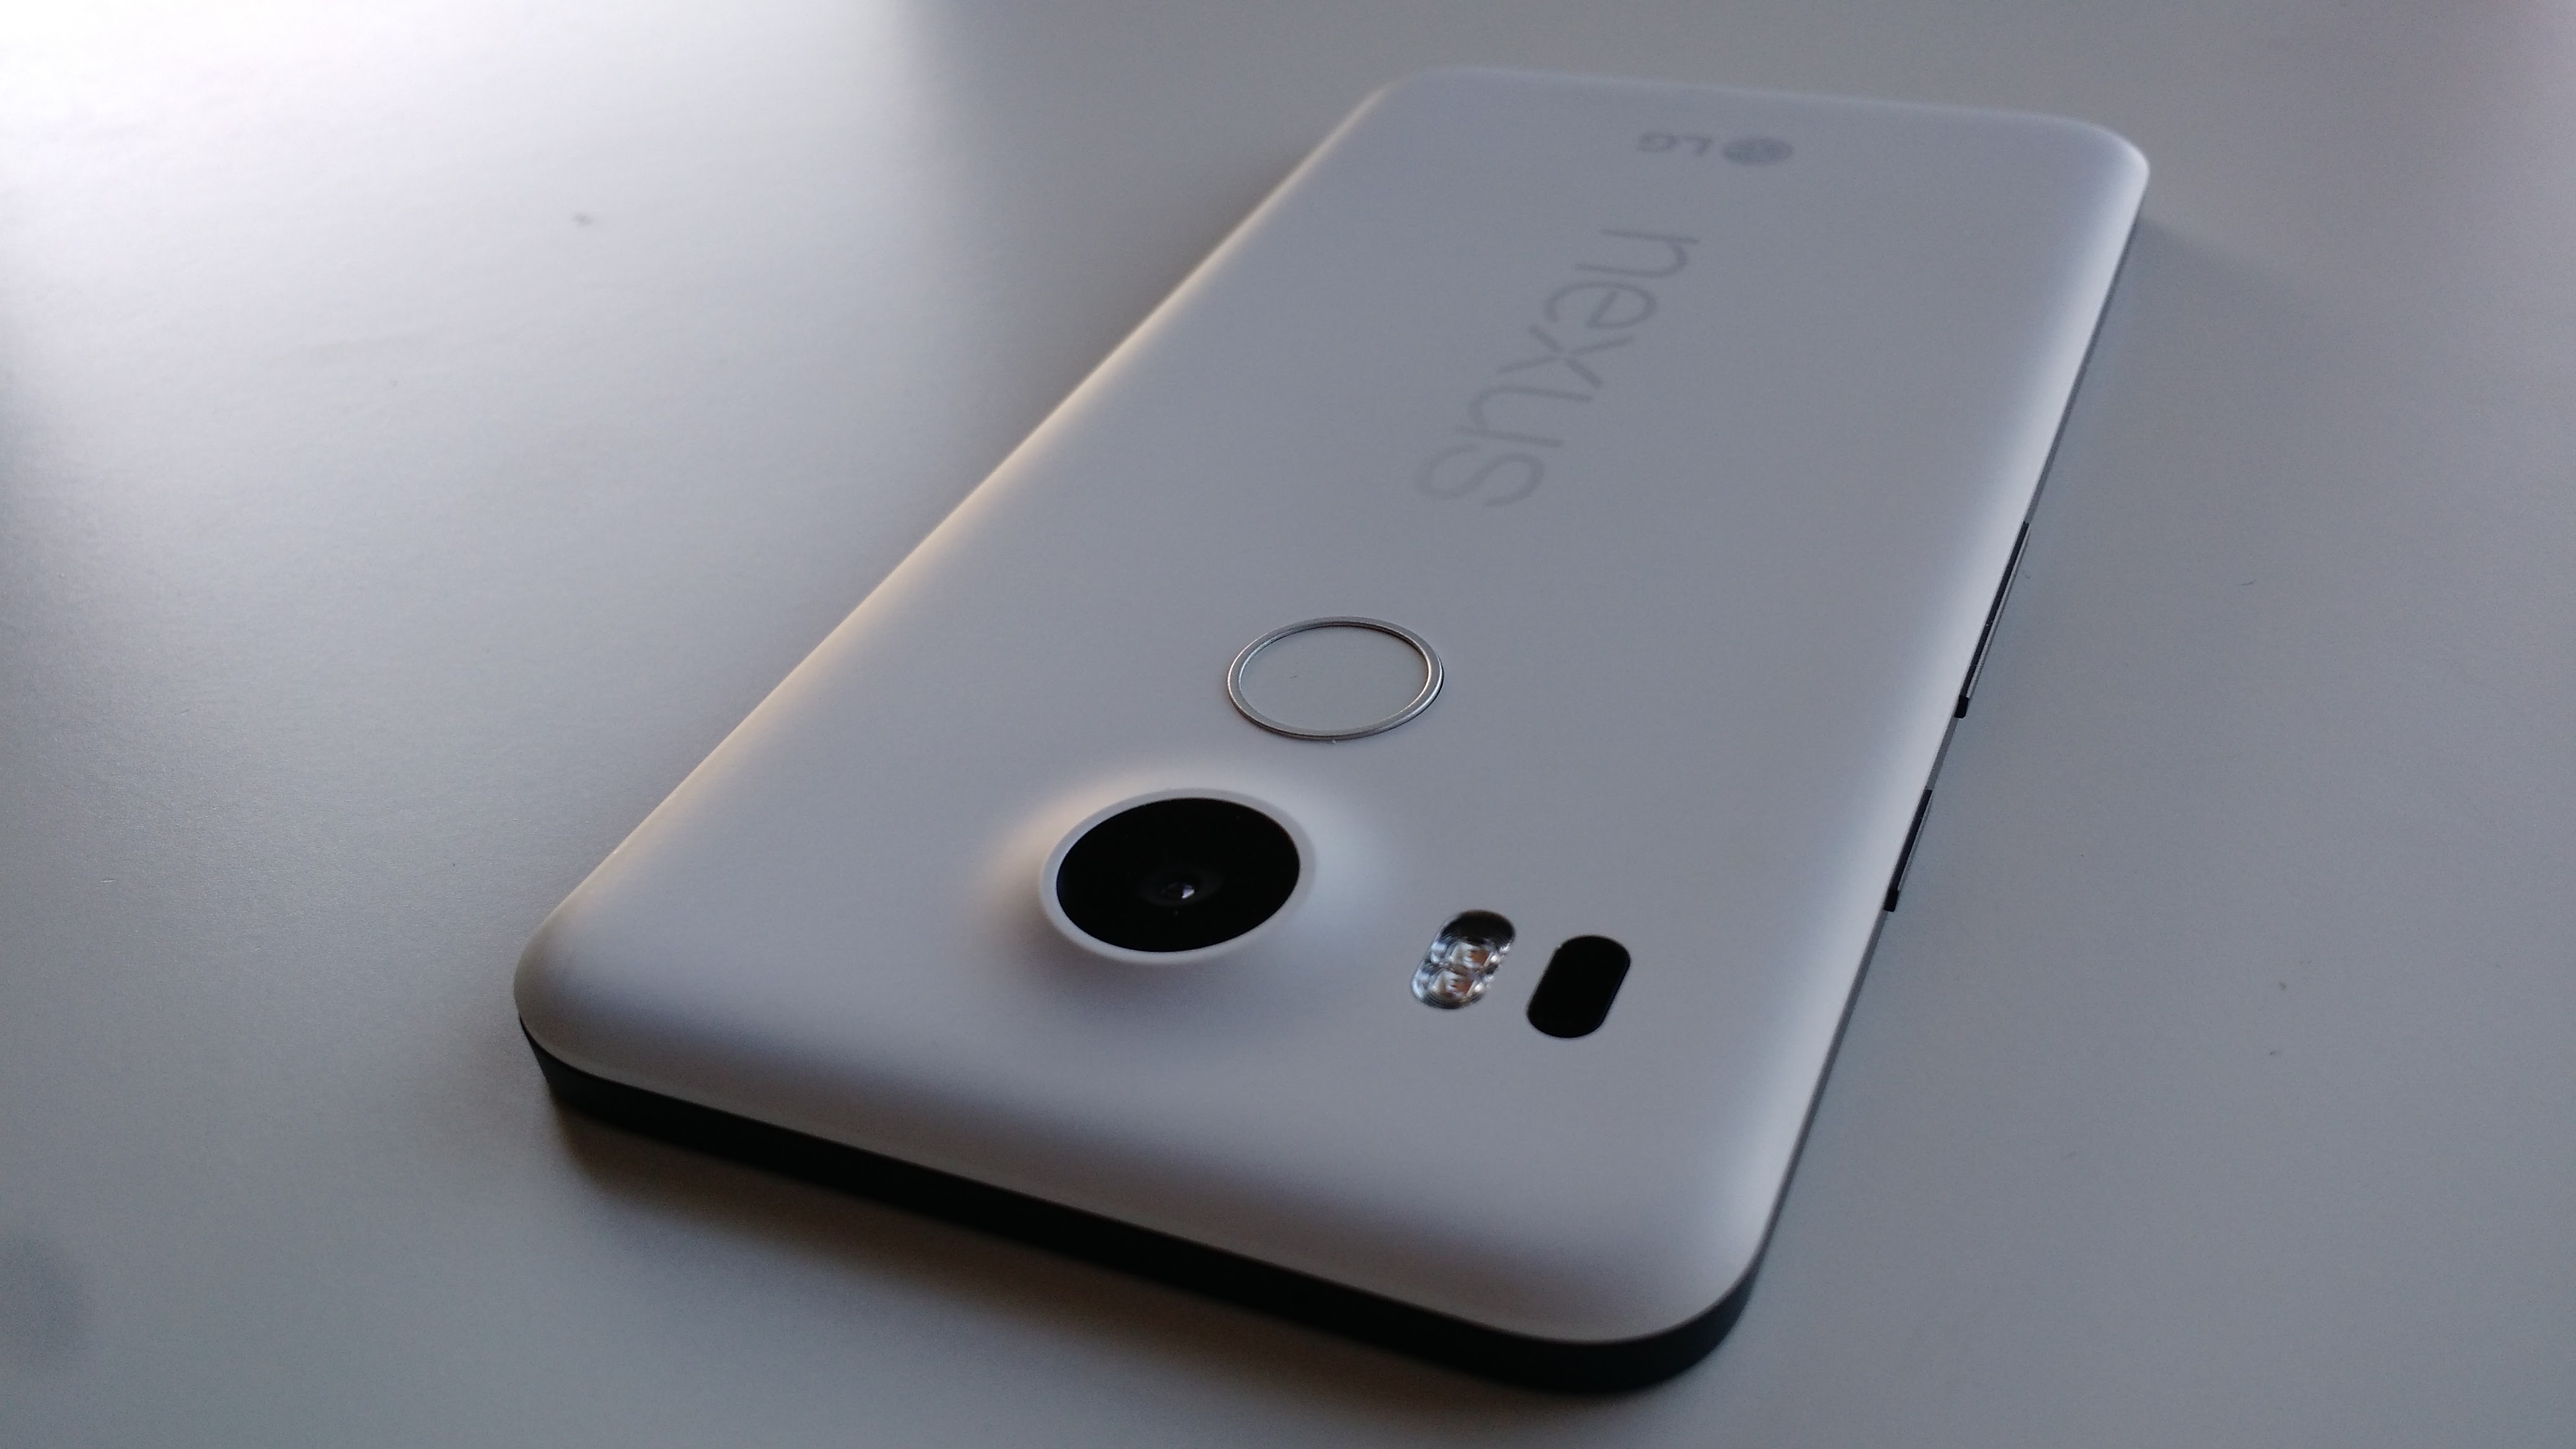 The back of the Nexus 5X.